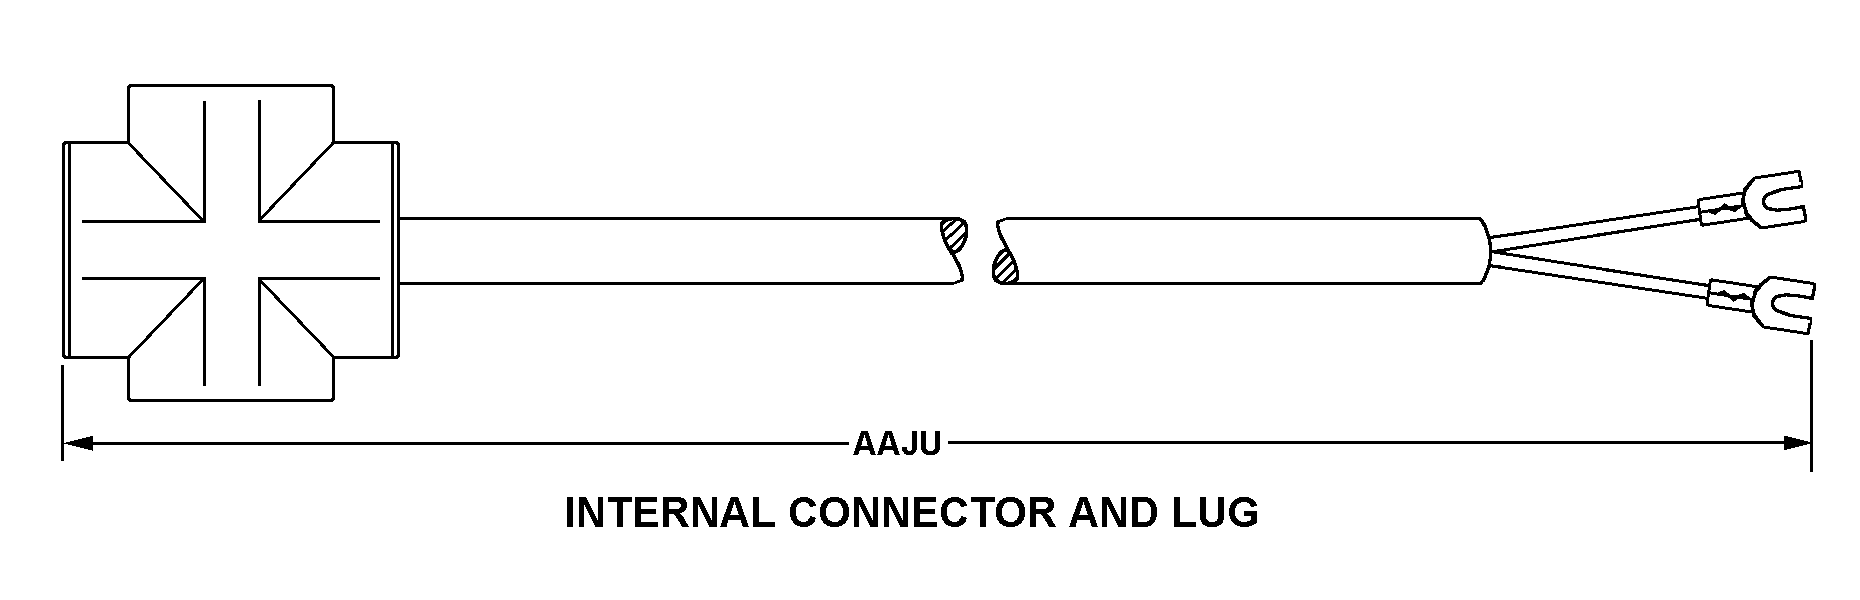 INTERNAL CONNECTOR AND LUG style nsn 6150-00-945-3183